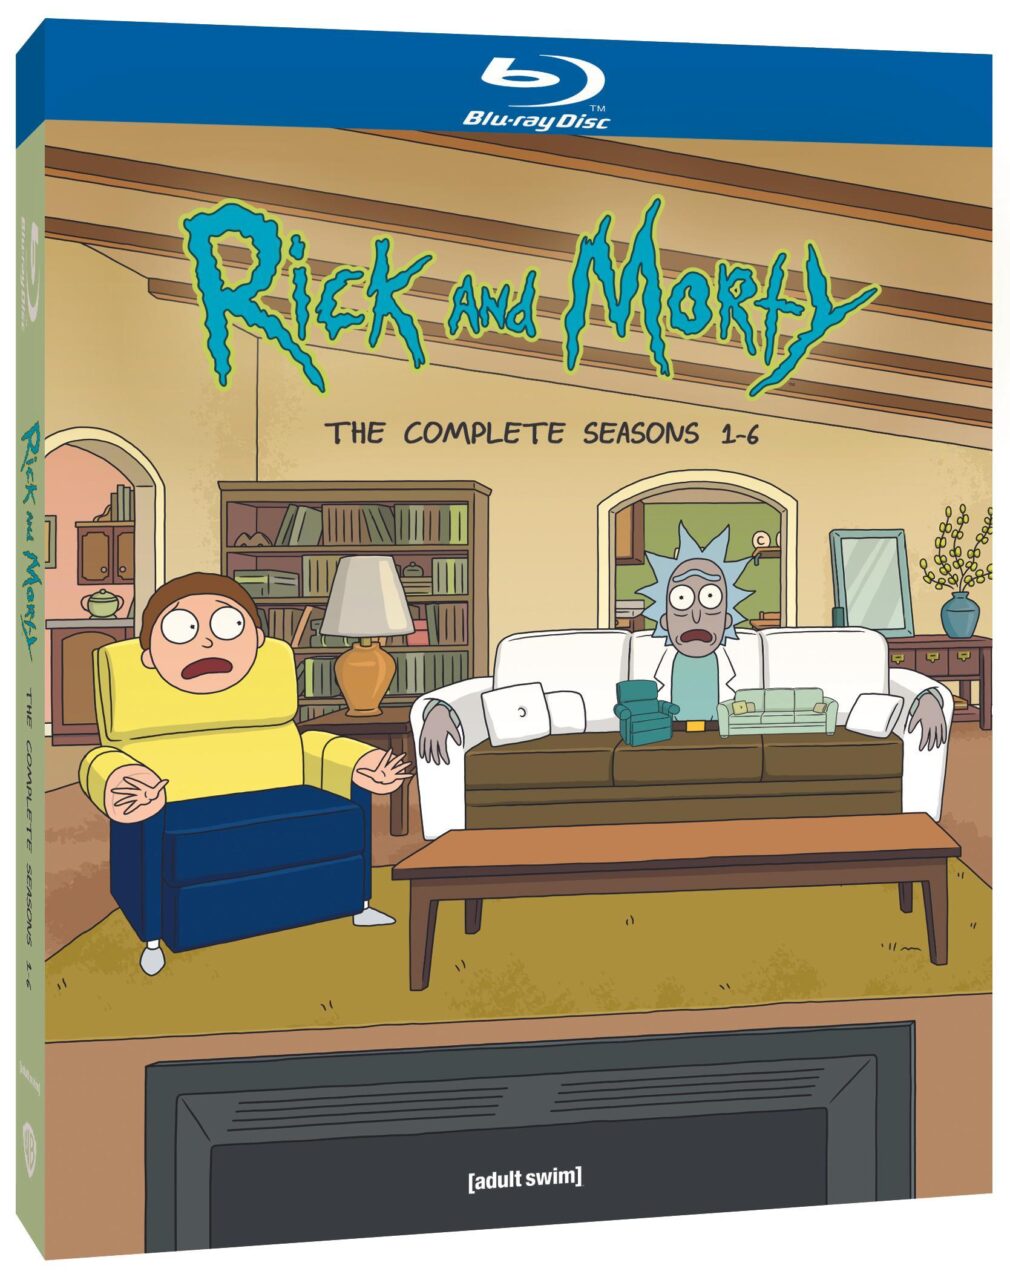 Rick And Morty: The Complete Seasons 1-6 Blu-Ray cover (Warner Bros. Discovery Home Entertainment)